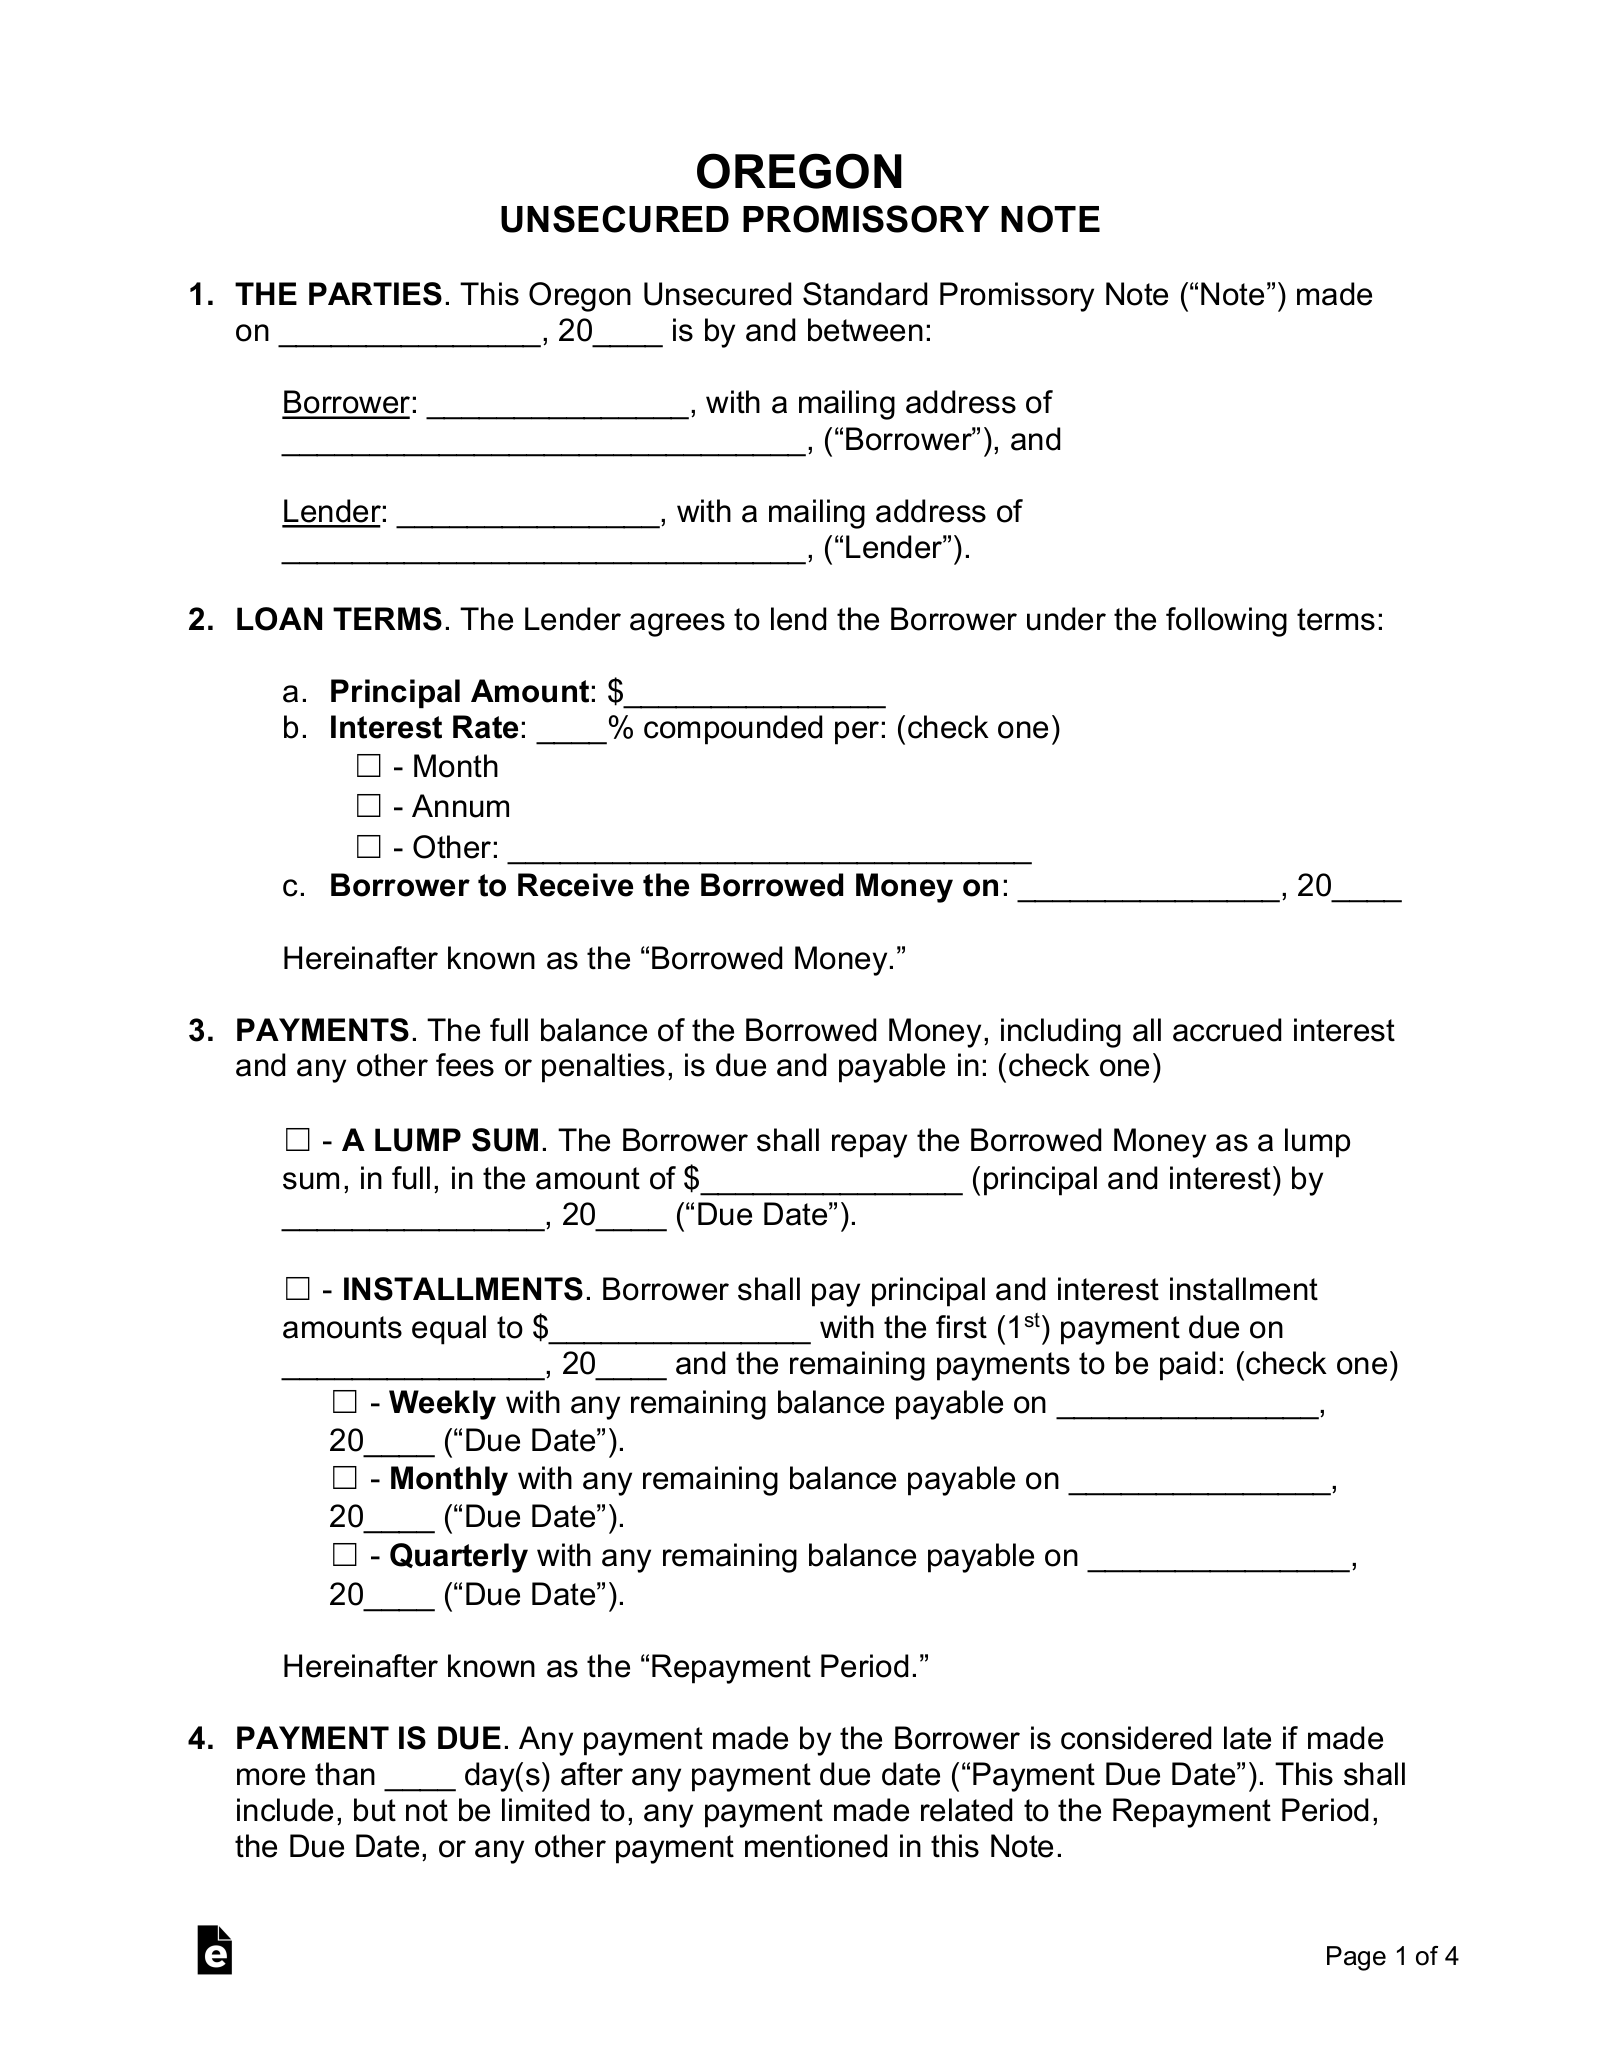 Oregon Unsecured Promissory Note Template